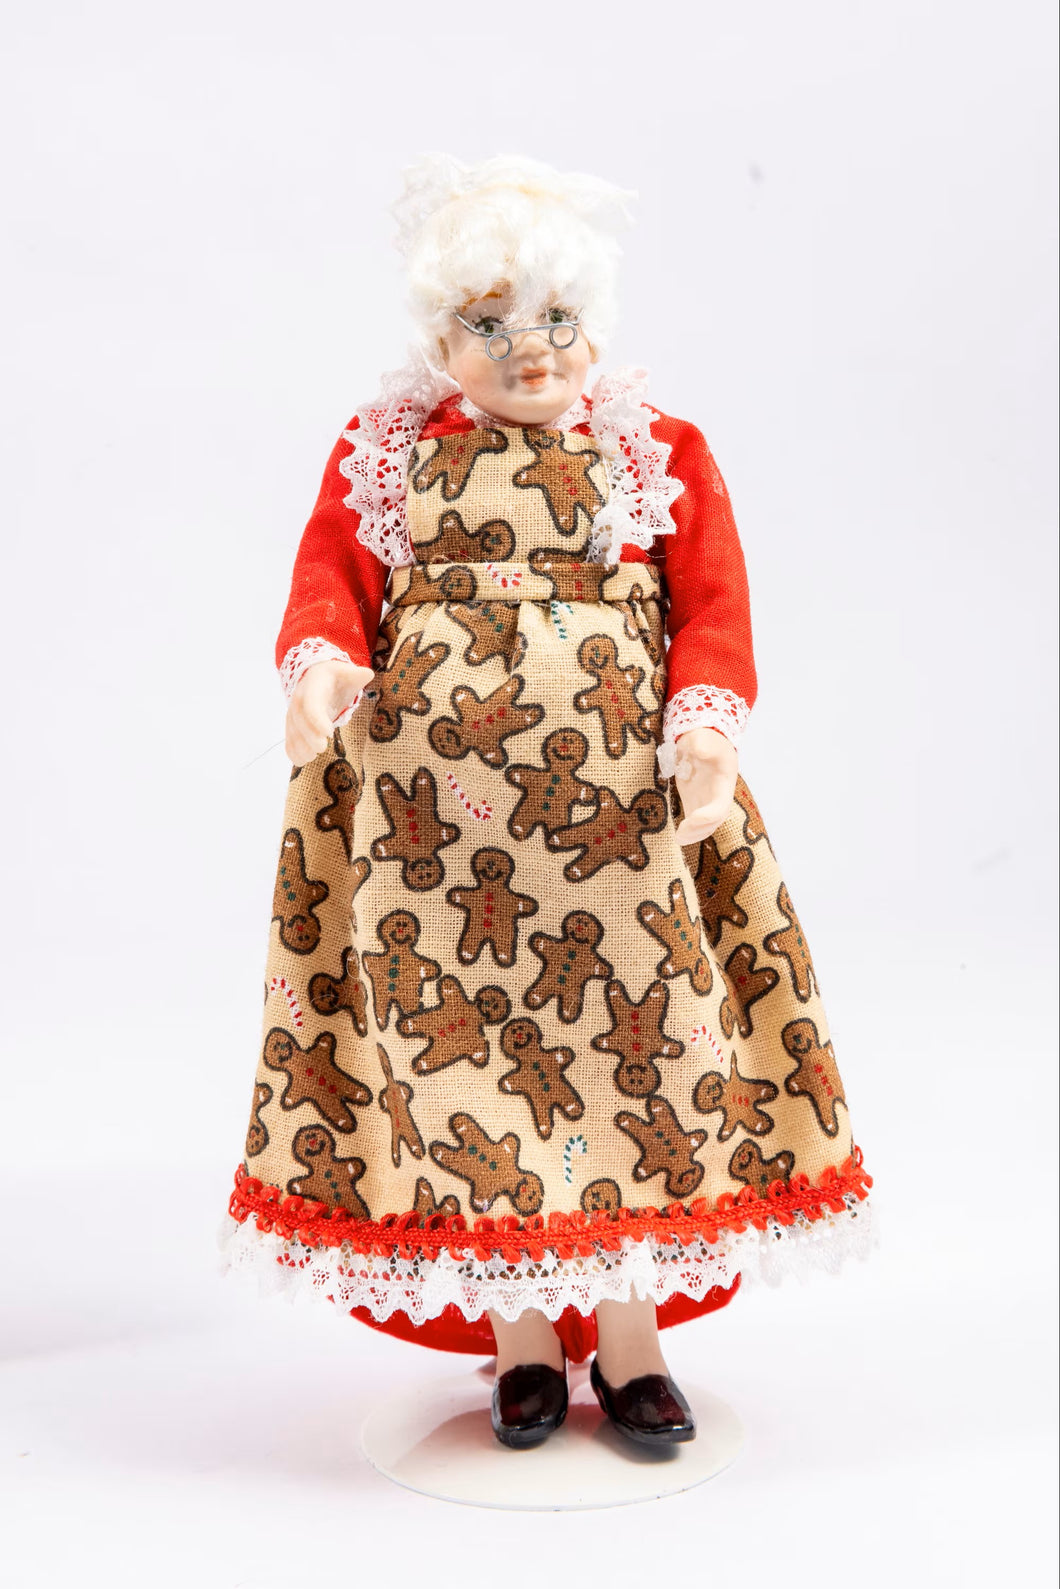 Christmas Porcelain Mrs. Claus Doll in Gingerbread Apron